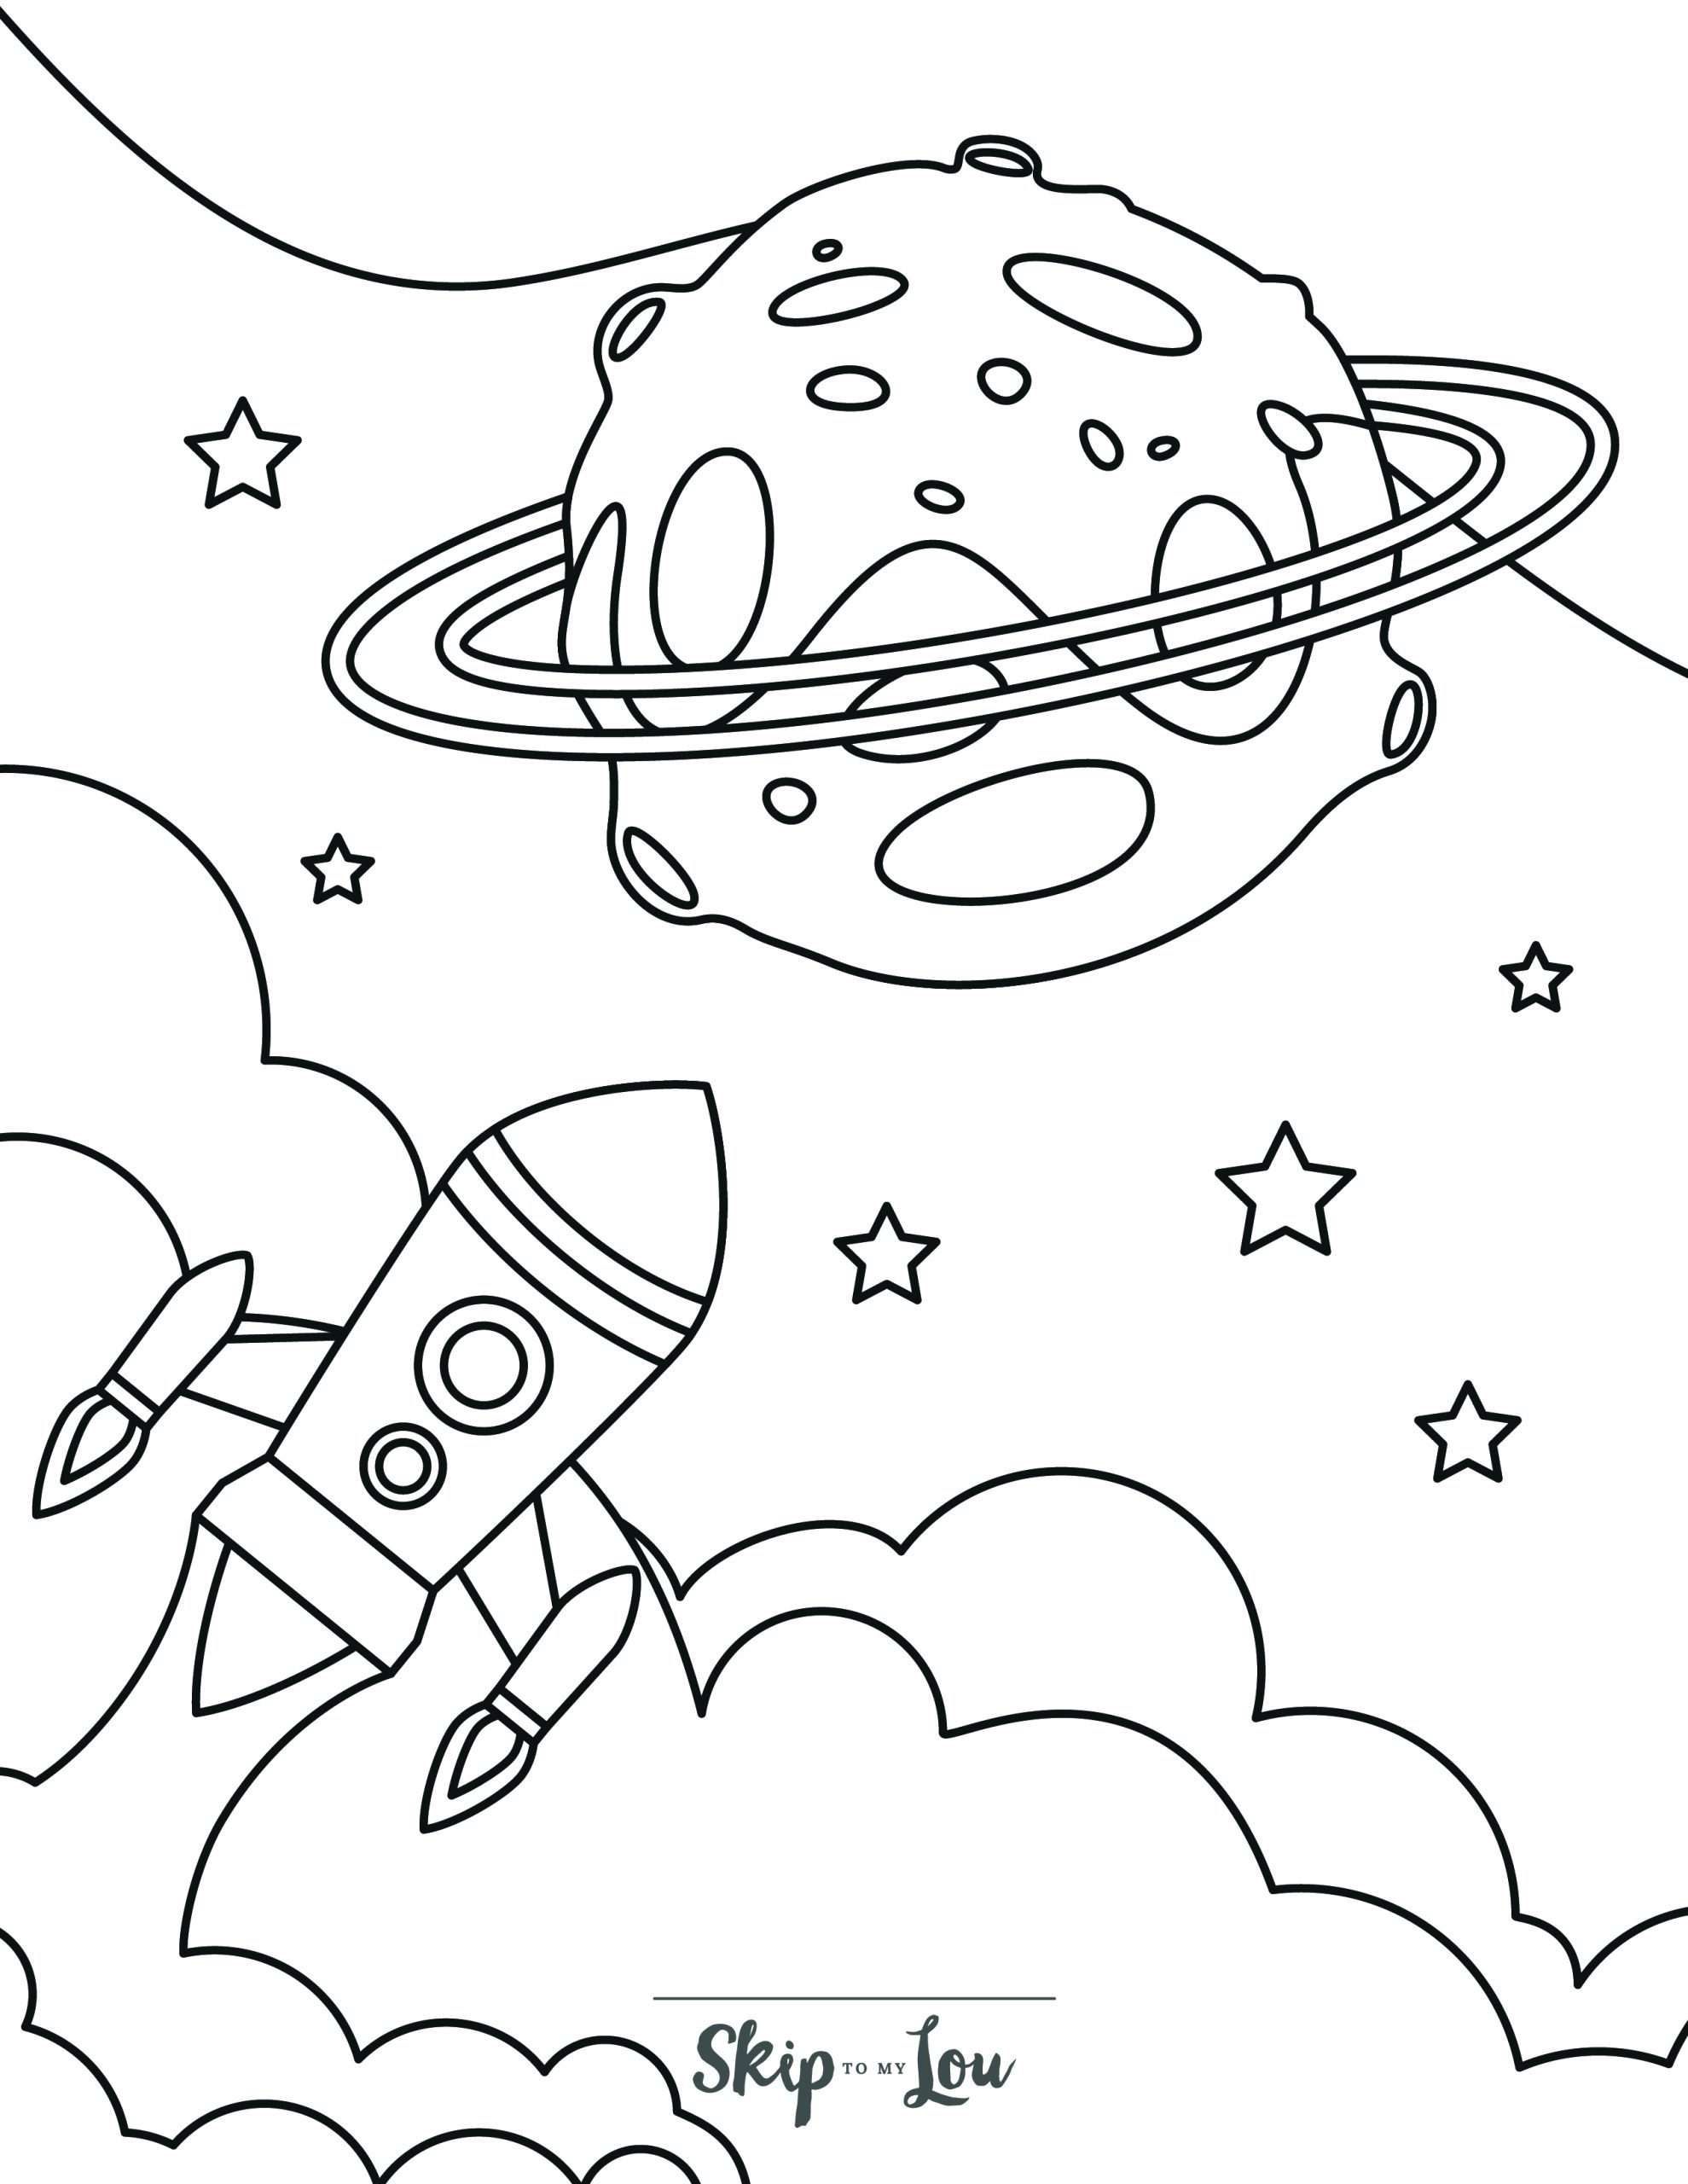 Celebrate Freedom with 4th of July: 180+ Free Coloring Pages 50